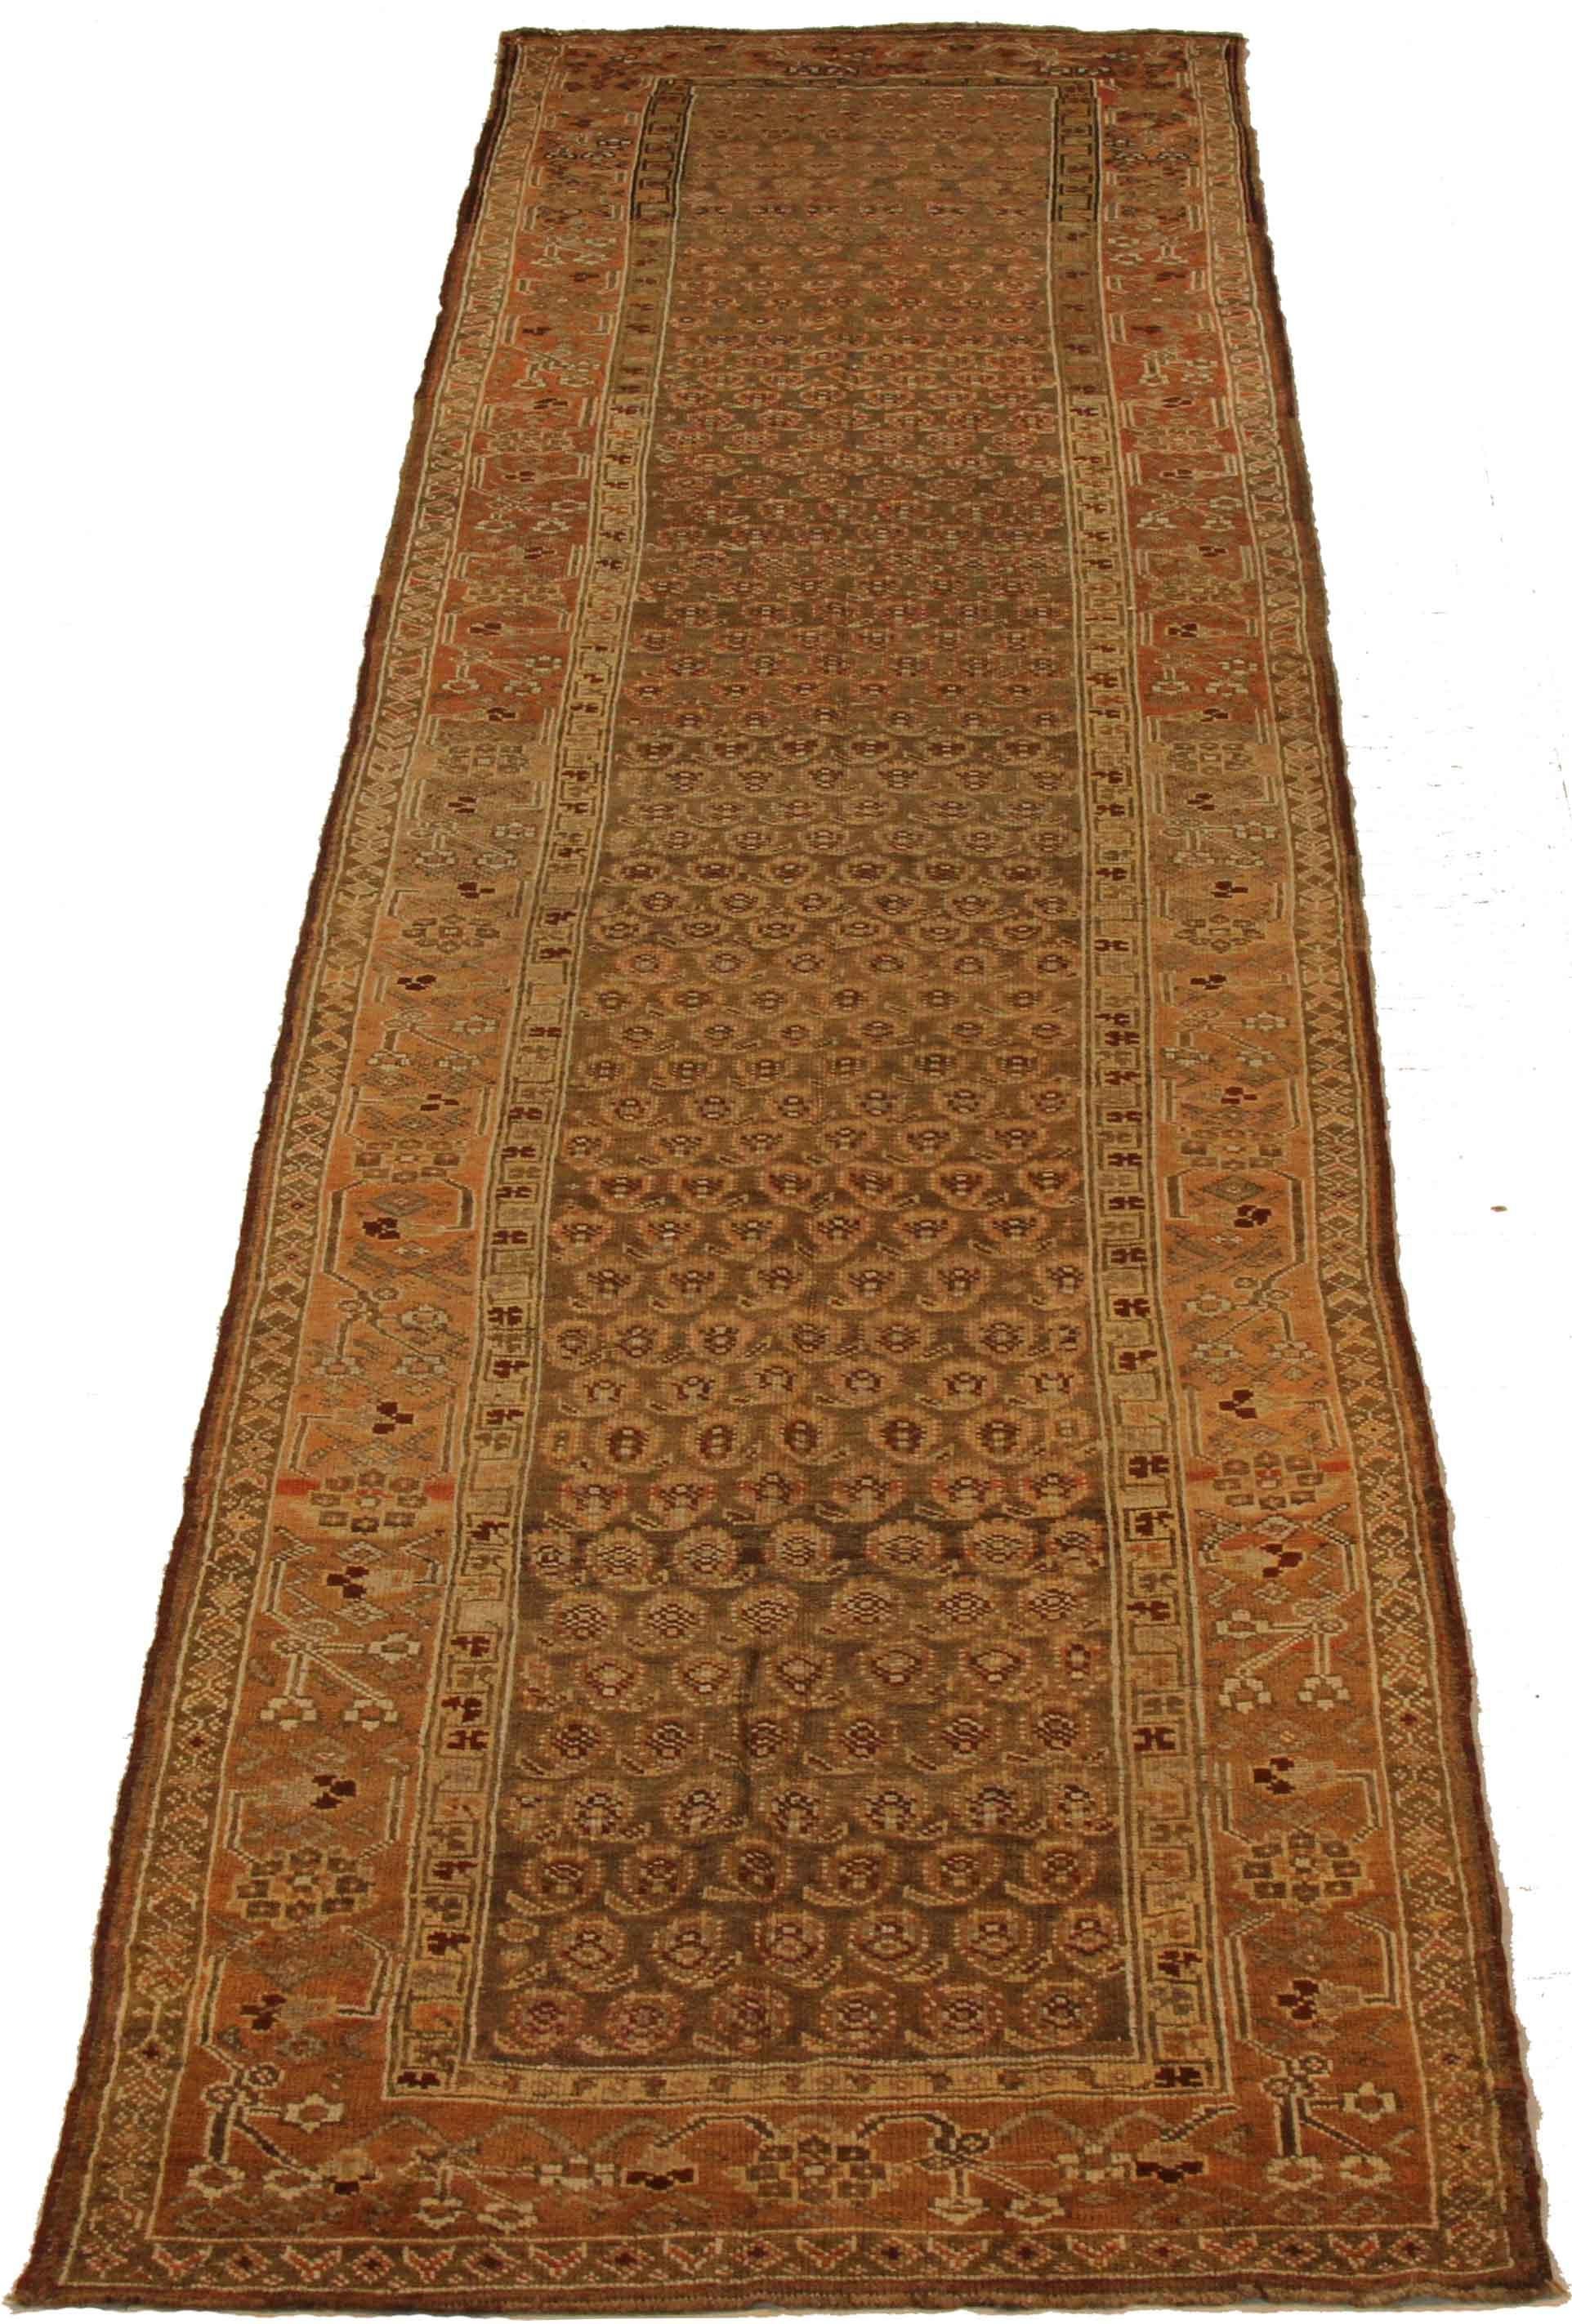 Antique Persian Rug Bijar Style with Elegant Native Patterns, circa 1920s In Excellent Condition For Sale In Dallas, TX